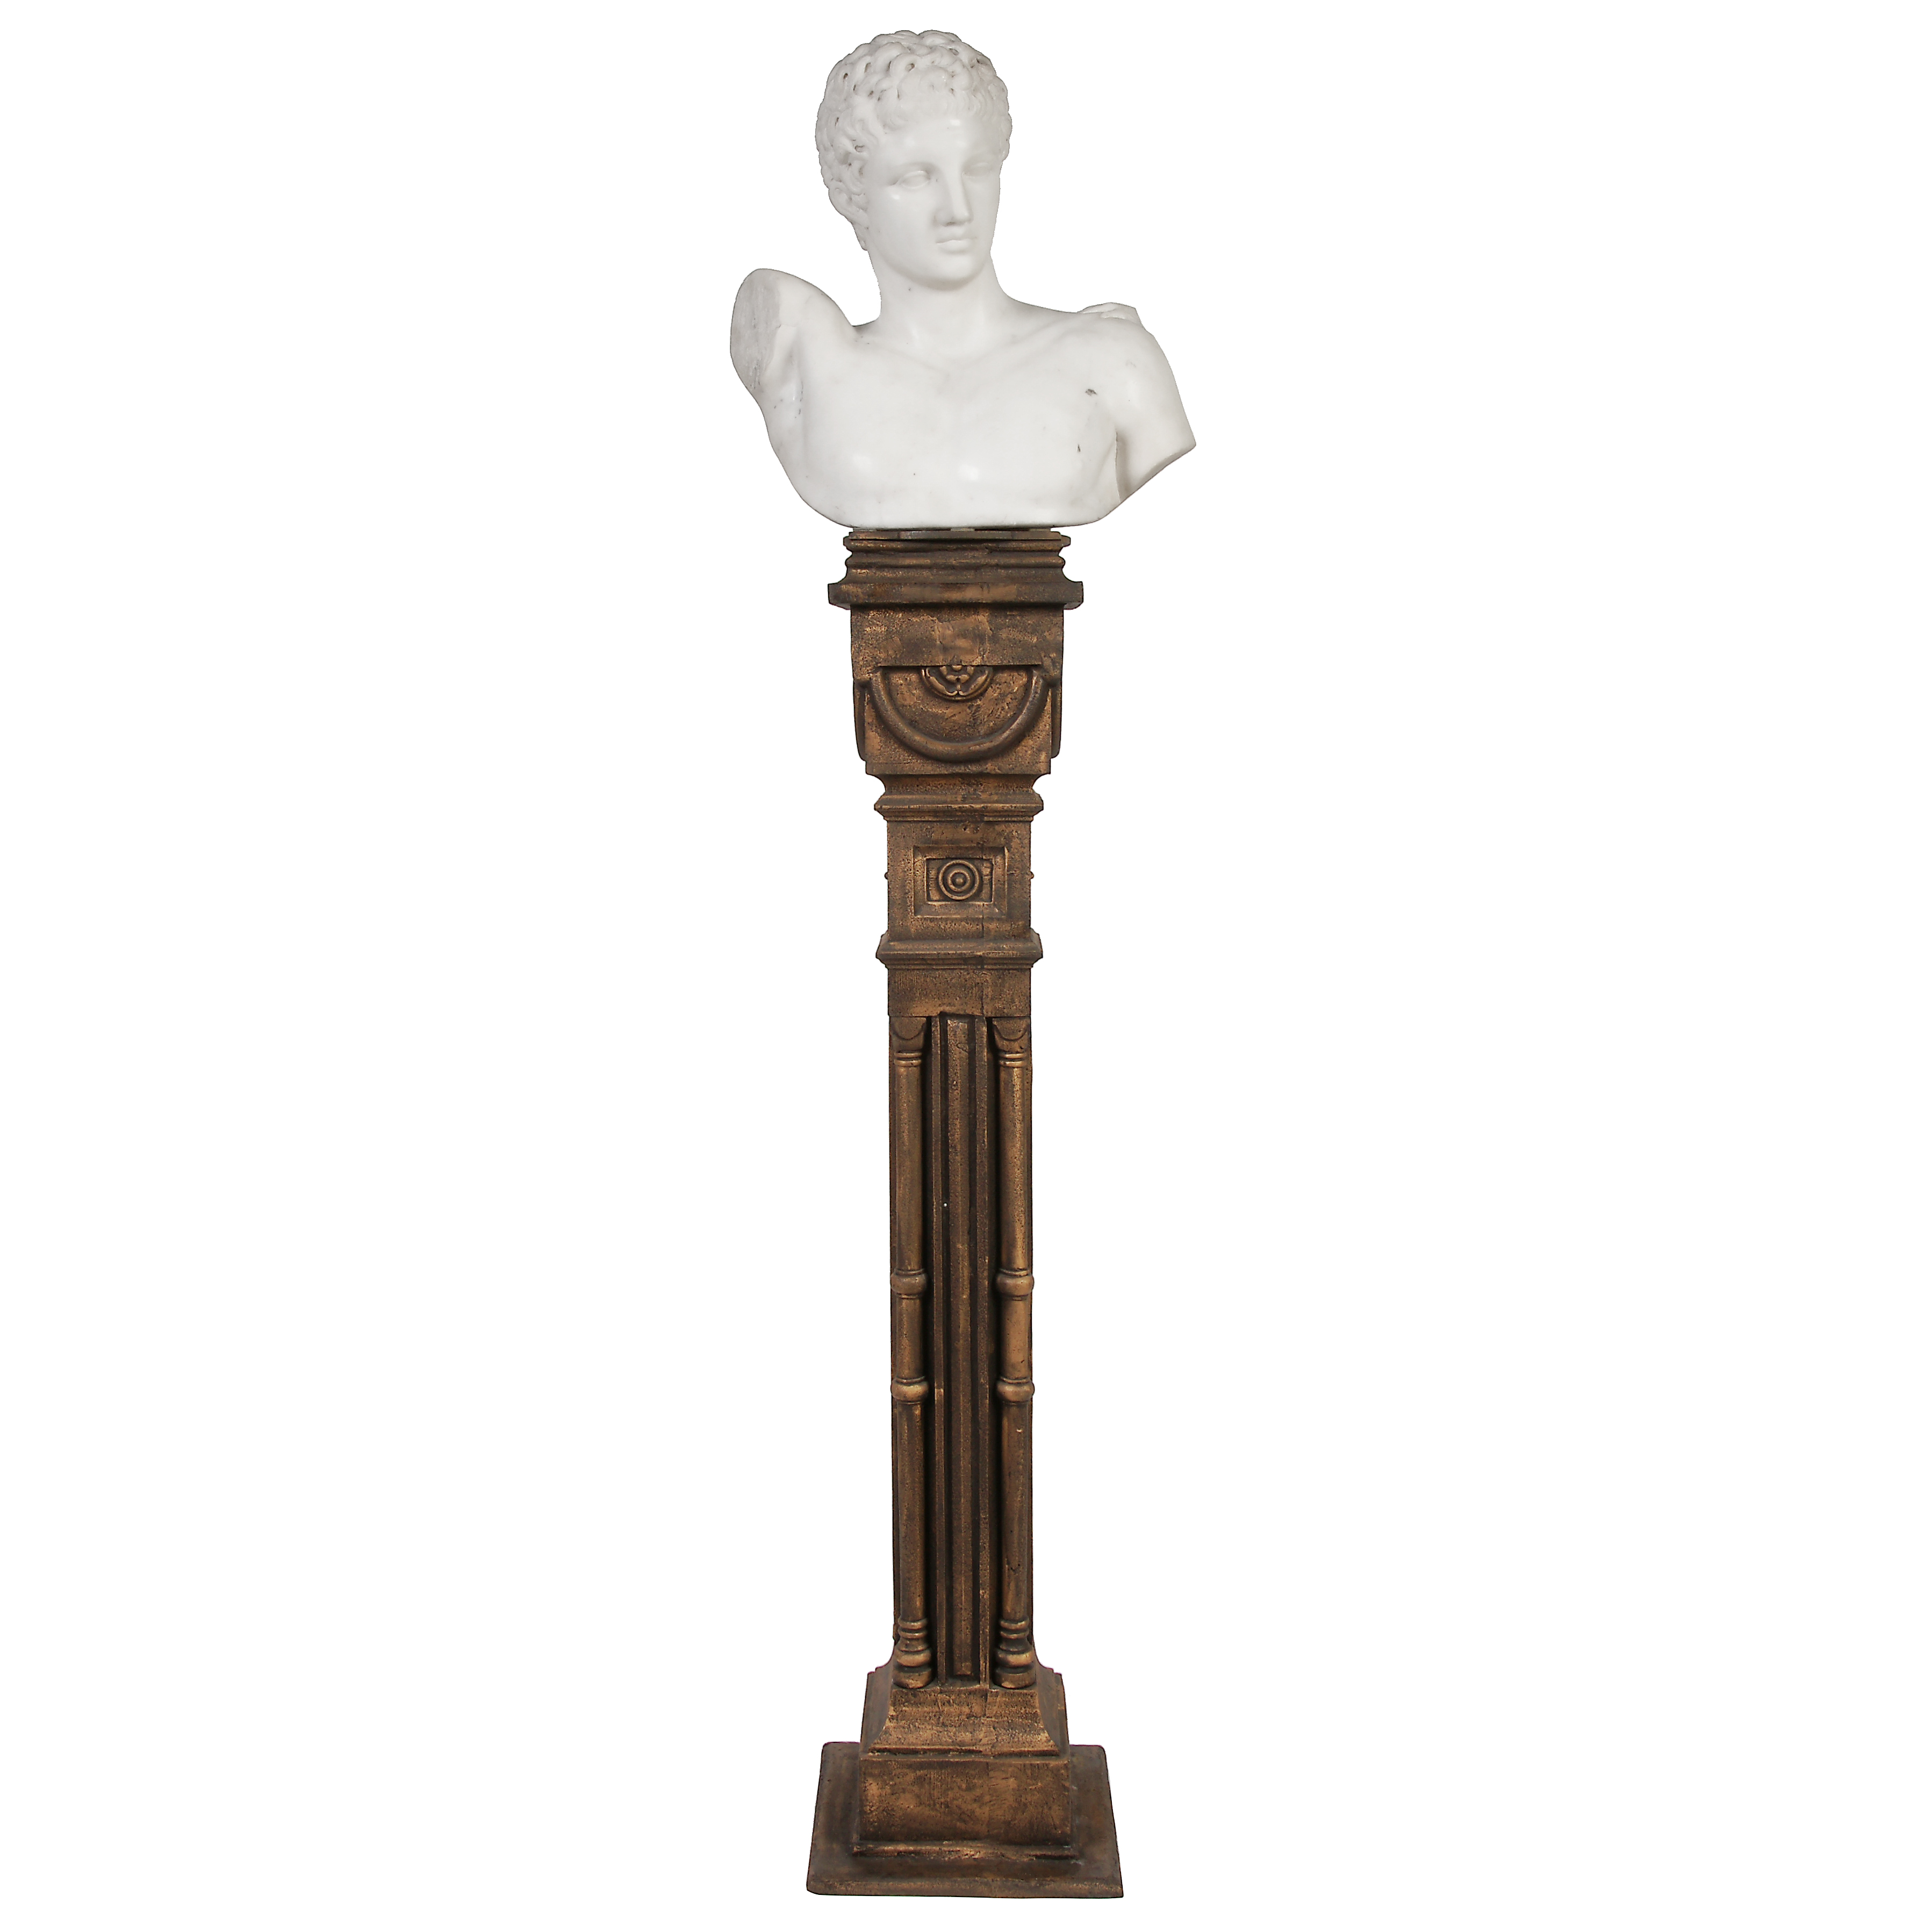 Other : Marble bust Hermes with a column